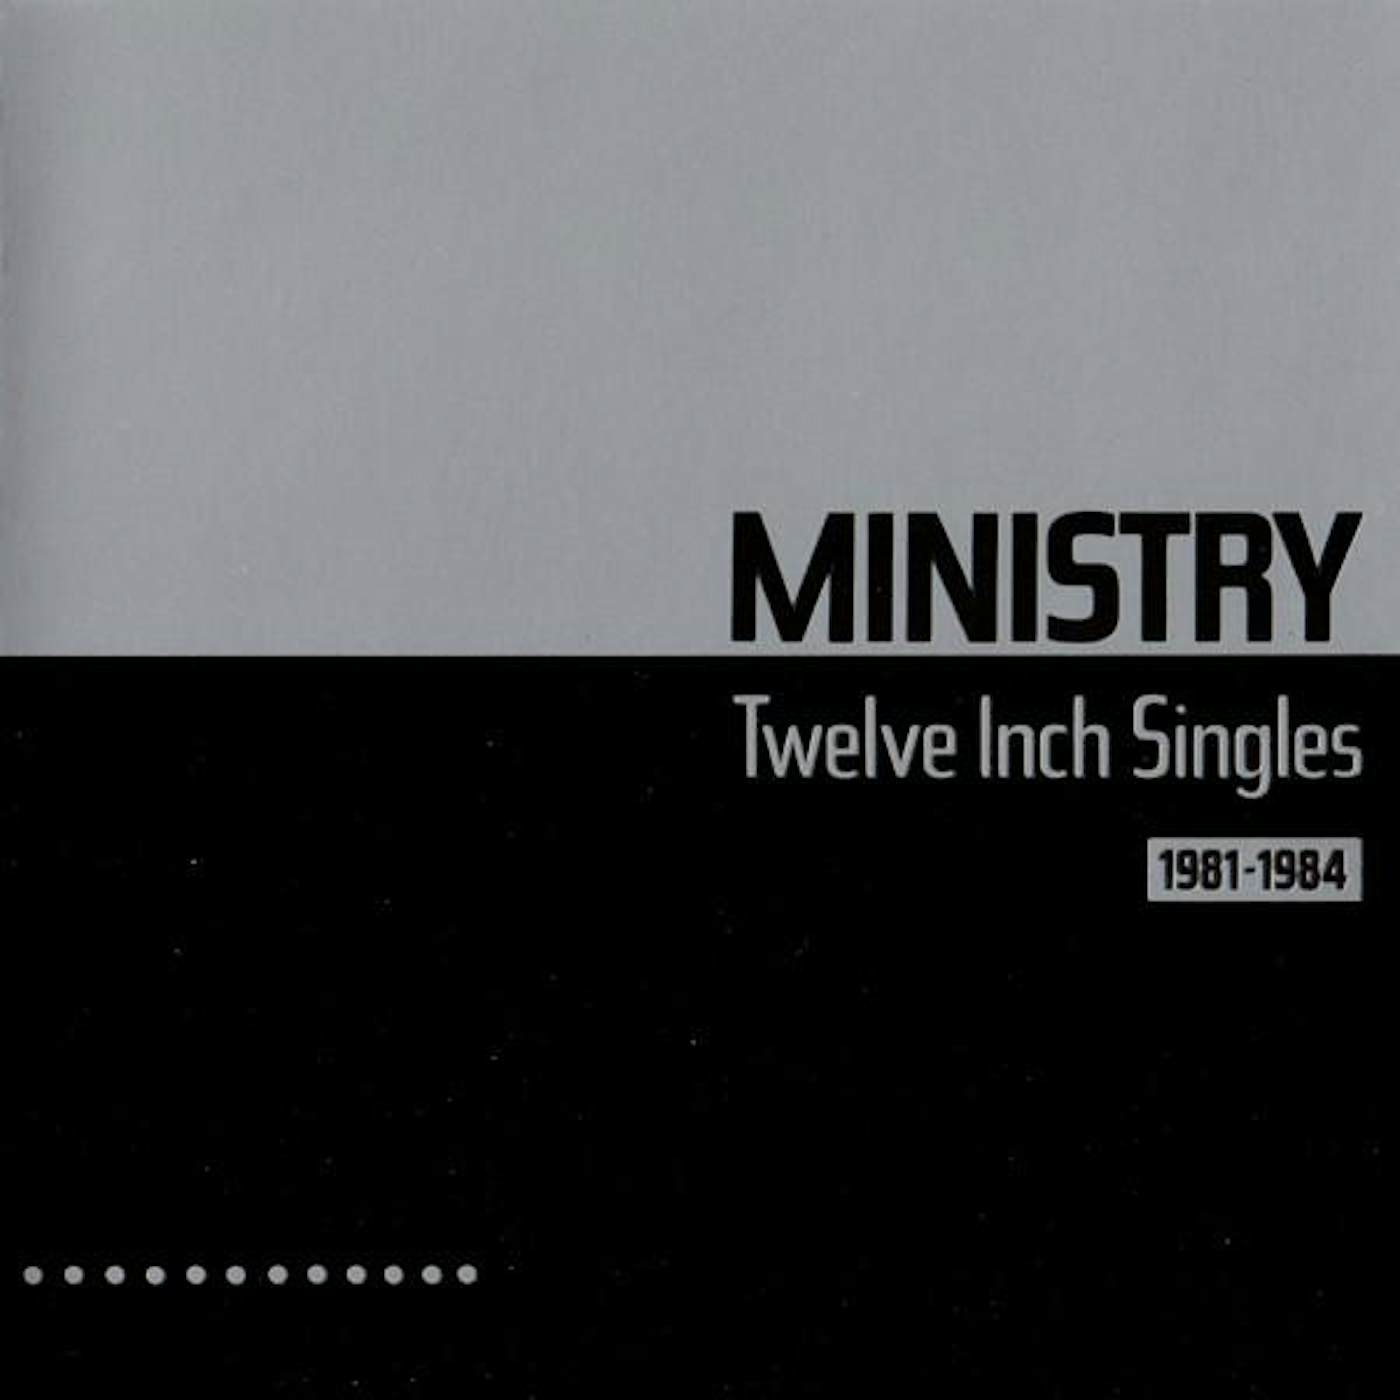 Ministry 12Inch Singles 1981-1984 (Red) Vinyl Record